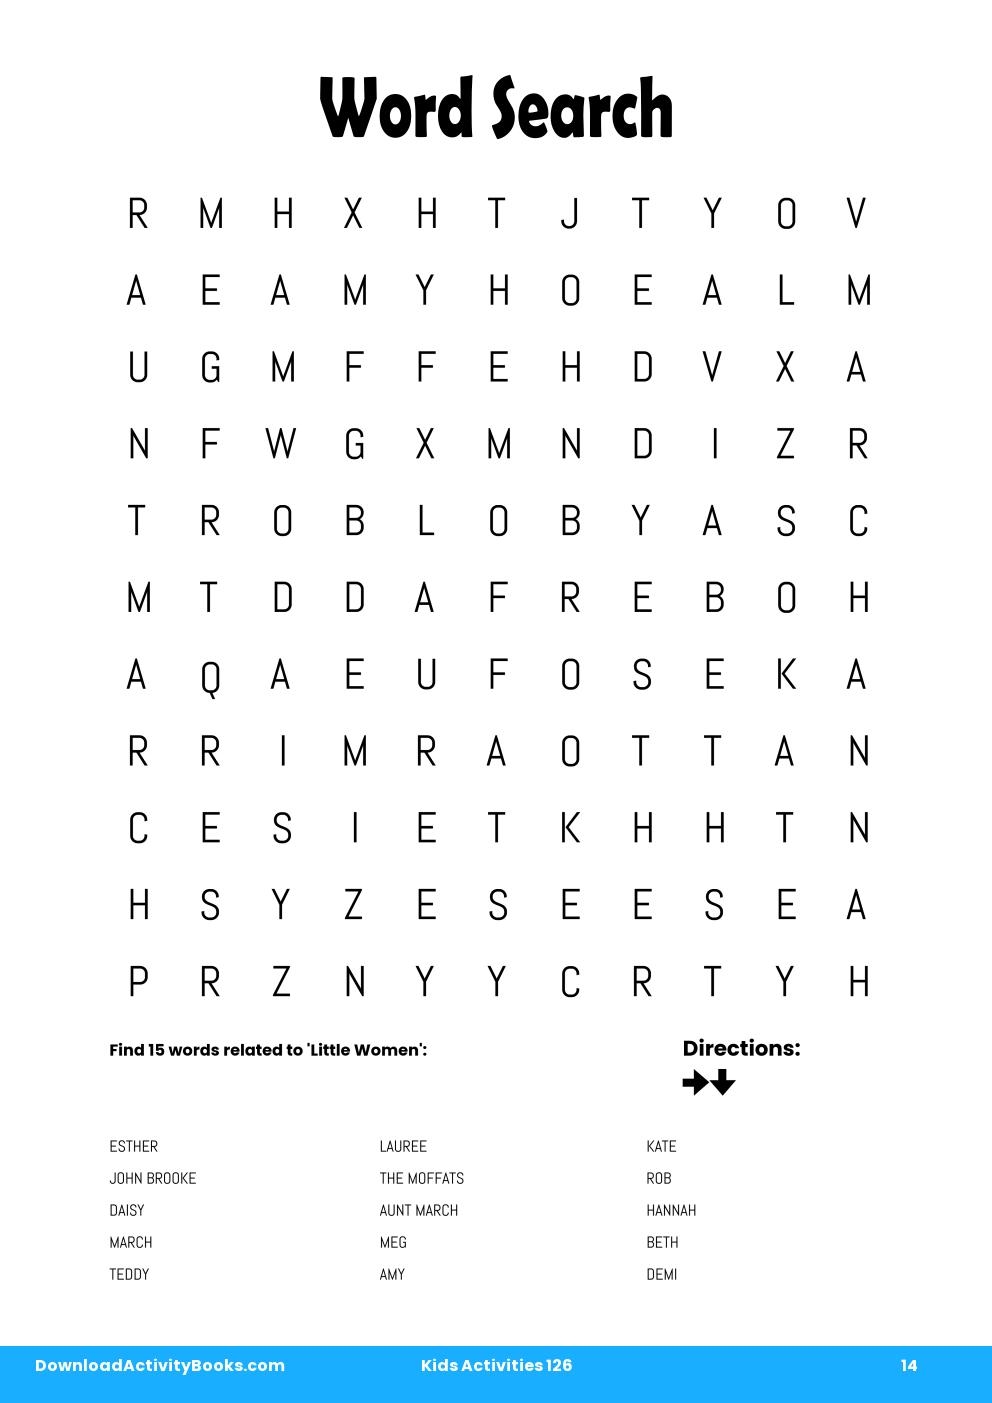 Word Search in Kids Activities 126